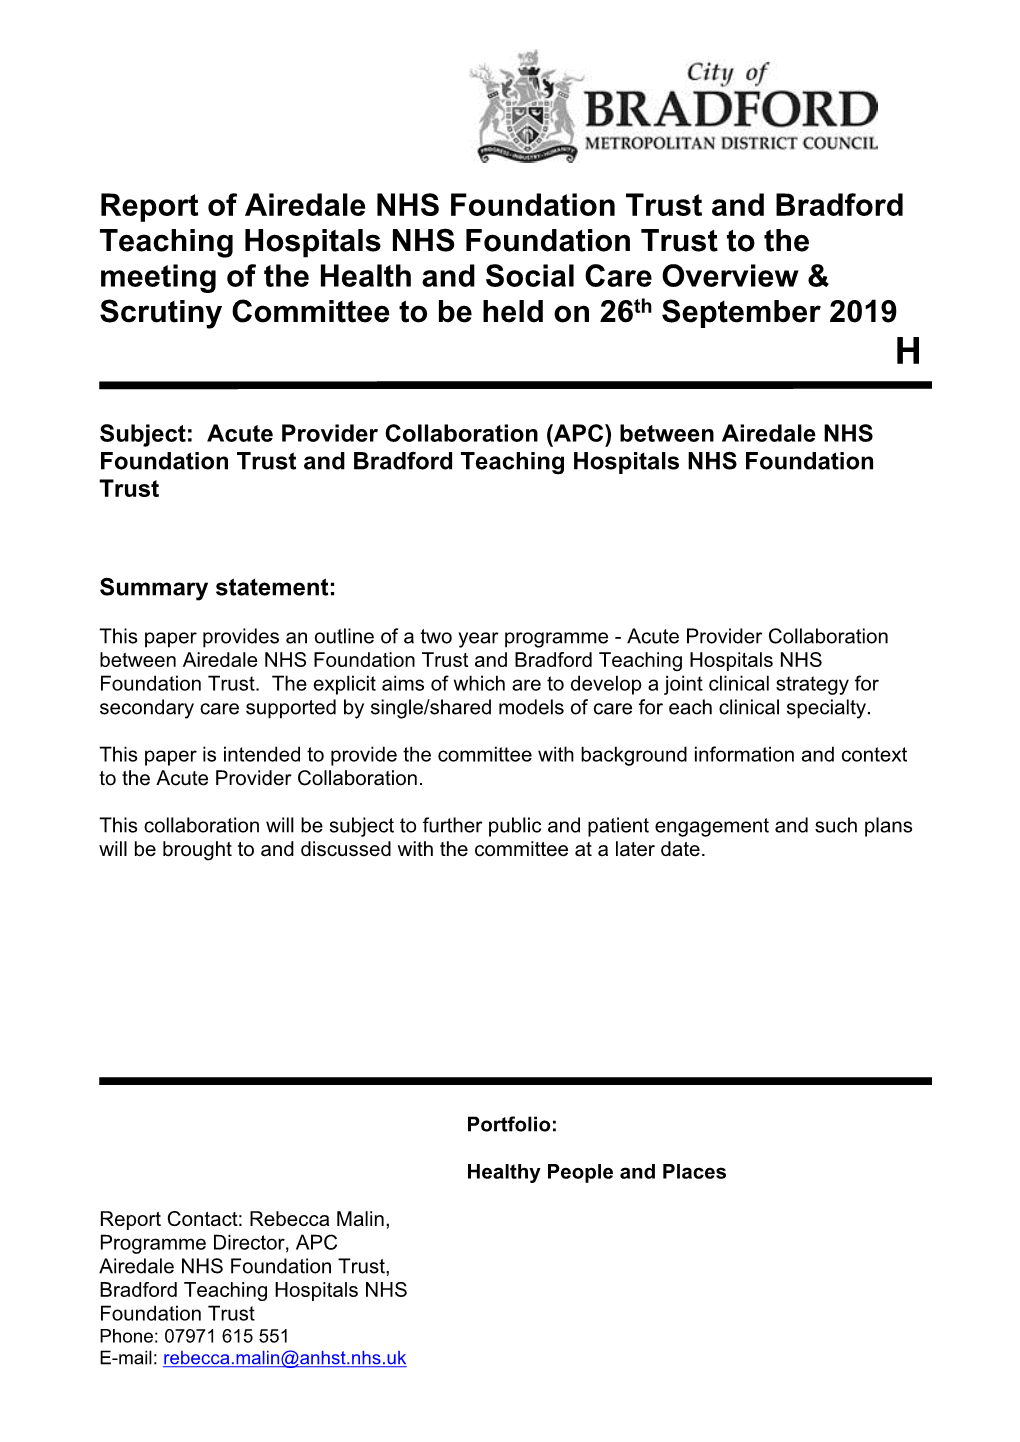 Report of Airedale NHS Foundation Trust and Bradford Teaching